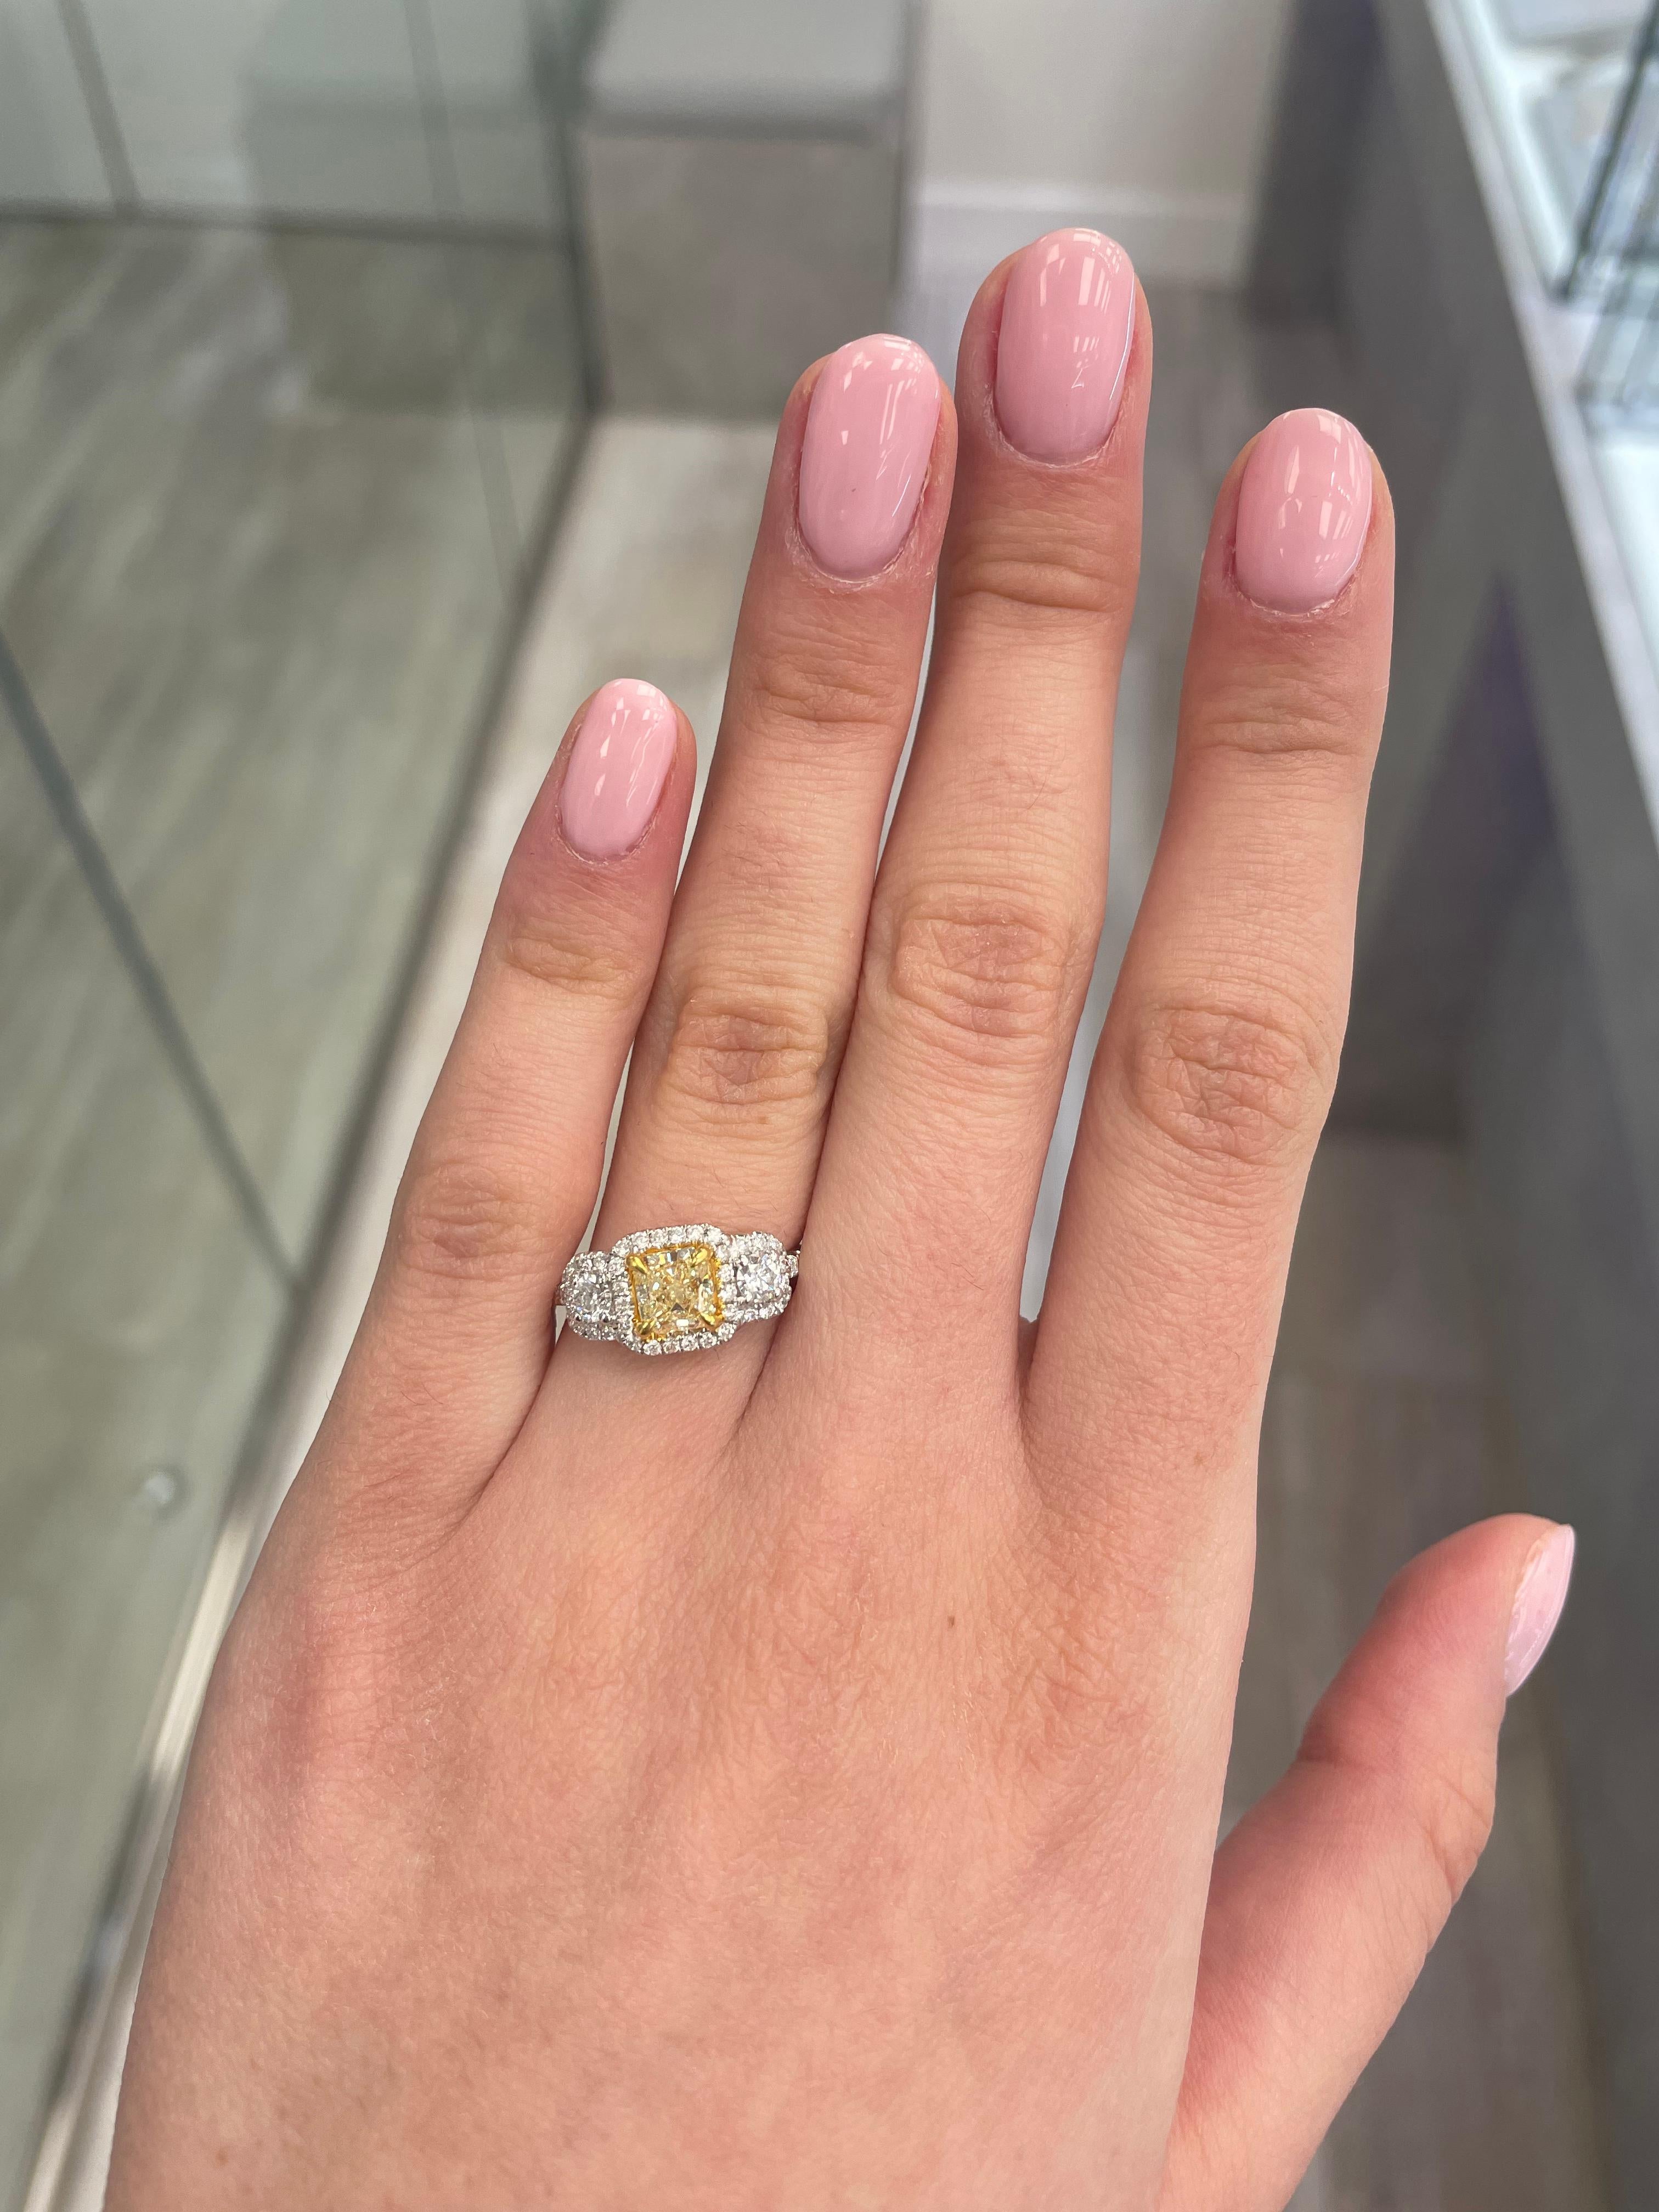 Stunning modern EGL certified fancy yellow diamond three stone halo ring, two-tone 18k yellow and white gold. By Alexander Beverly Hills
1.65 carats total diamond weight.
1.01 carat cushion Fancy Yellow color and VS1 clarity diamond, EGL graded.